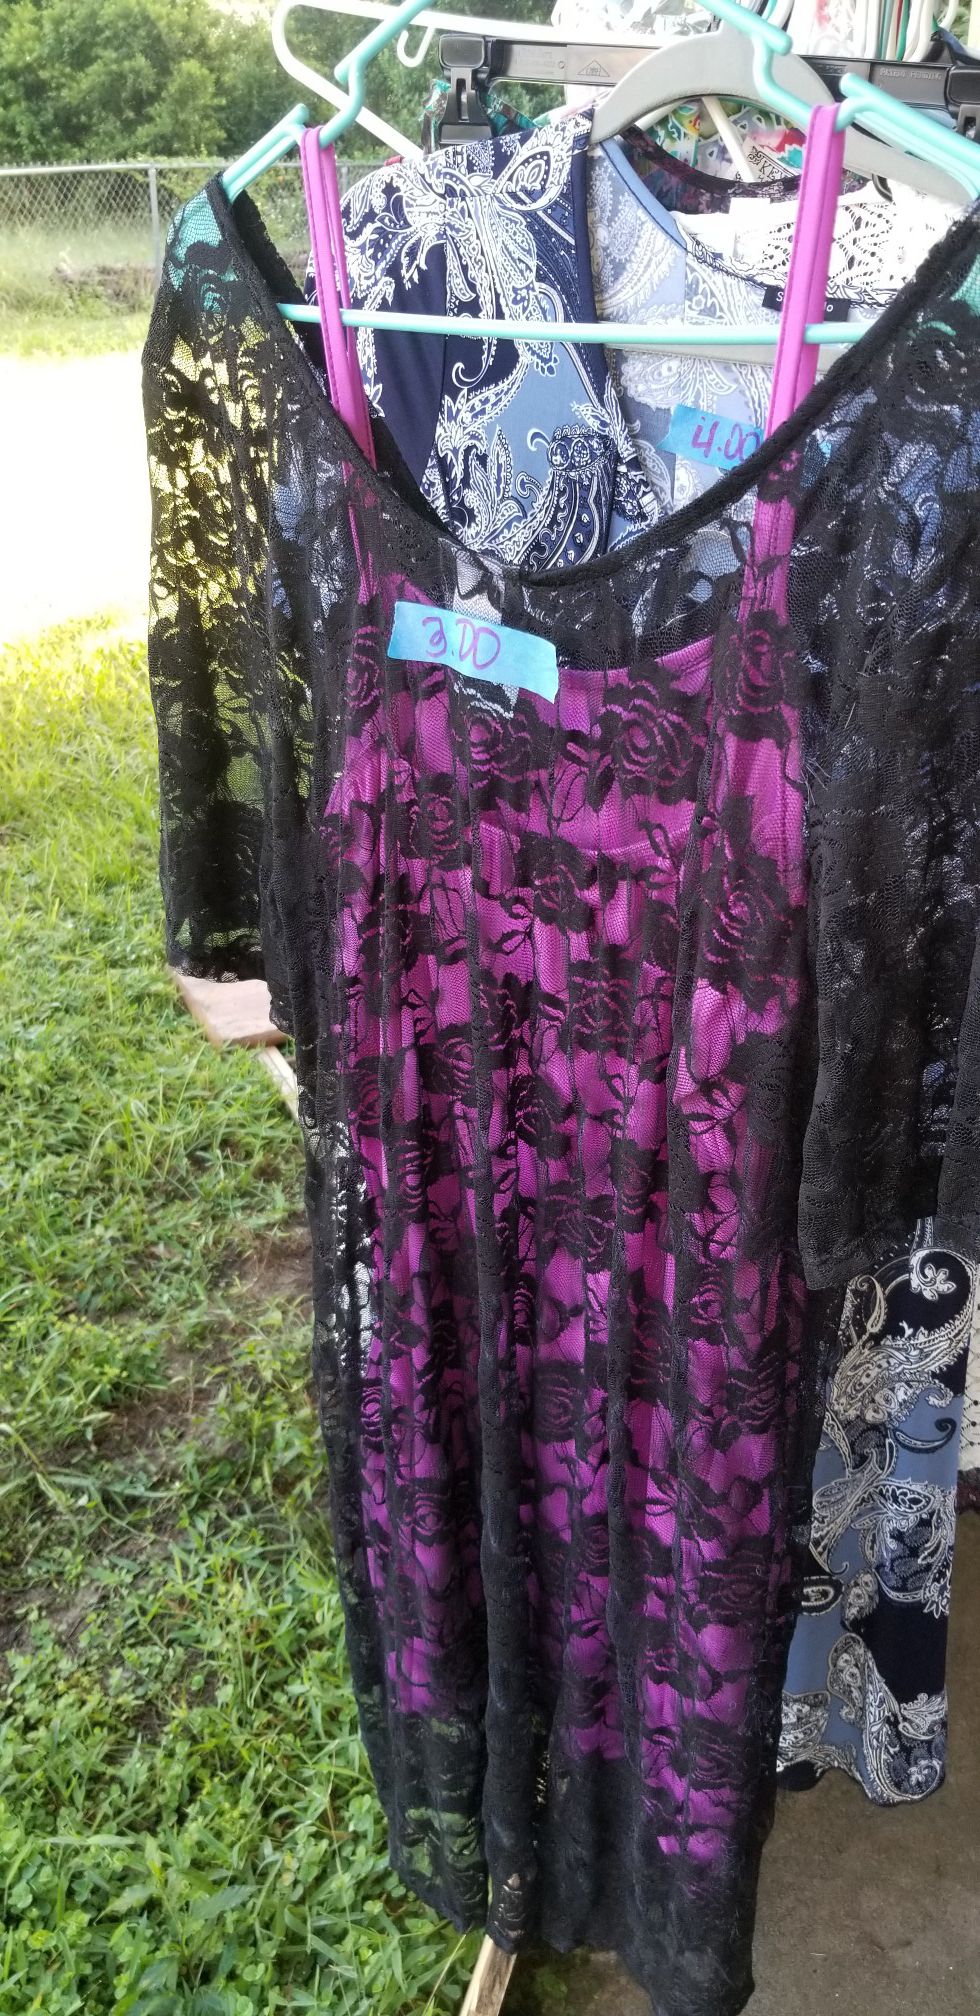 Hot pink and black dress 2xlarge